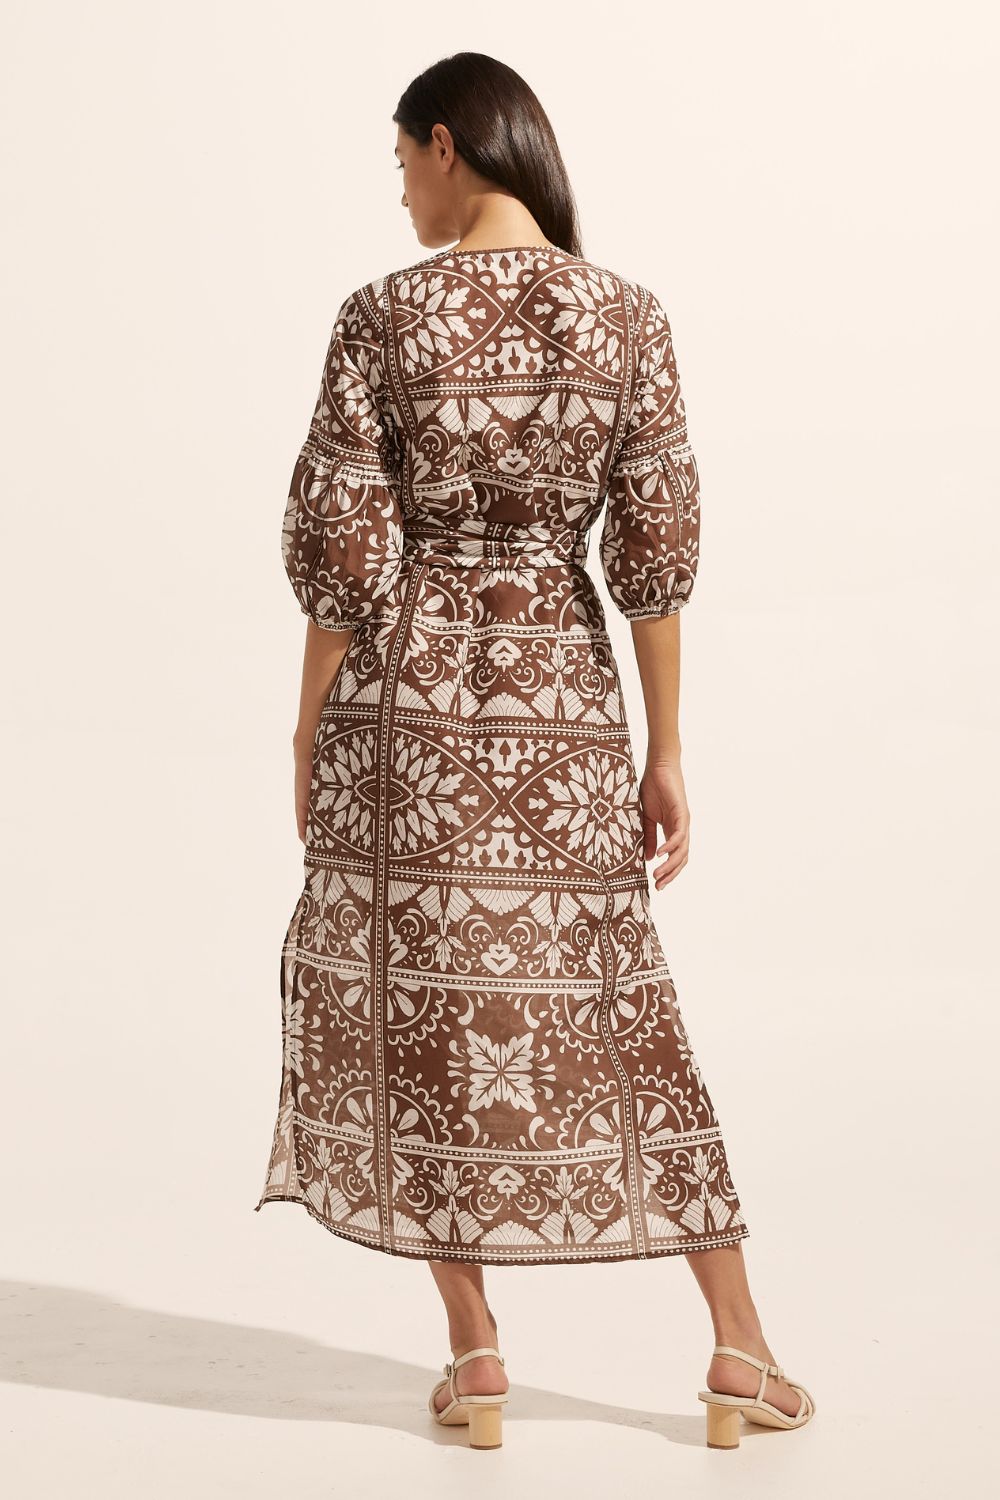 brown and white print, fabric self tie belt, mid length sleeve, rounded neckline, side splits, back view